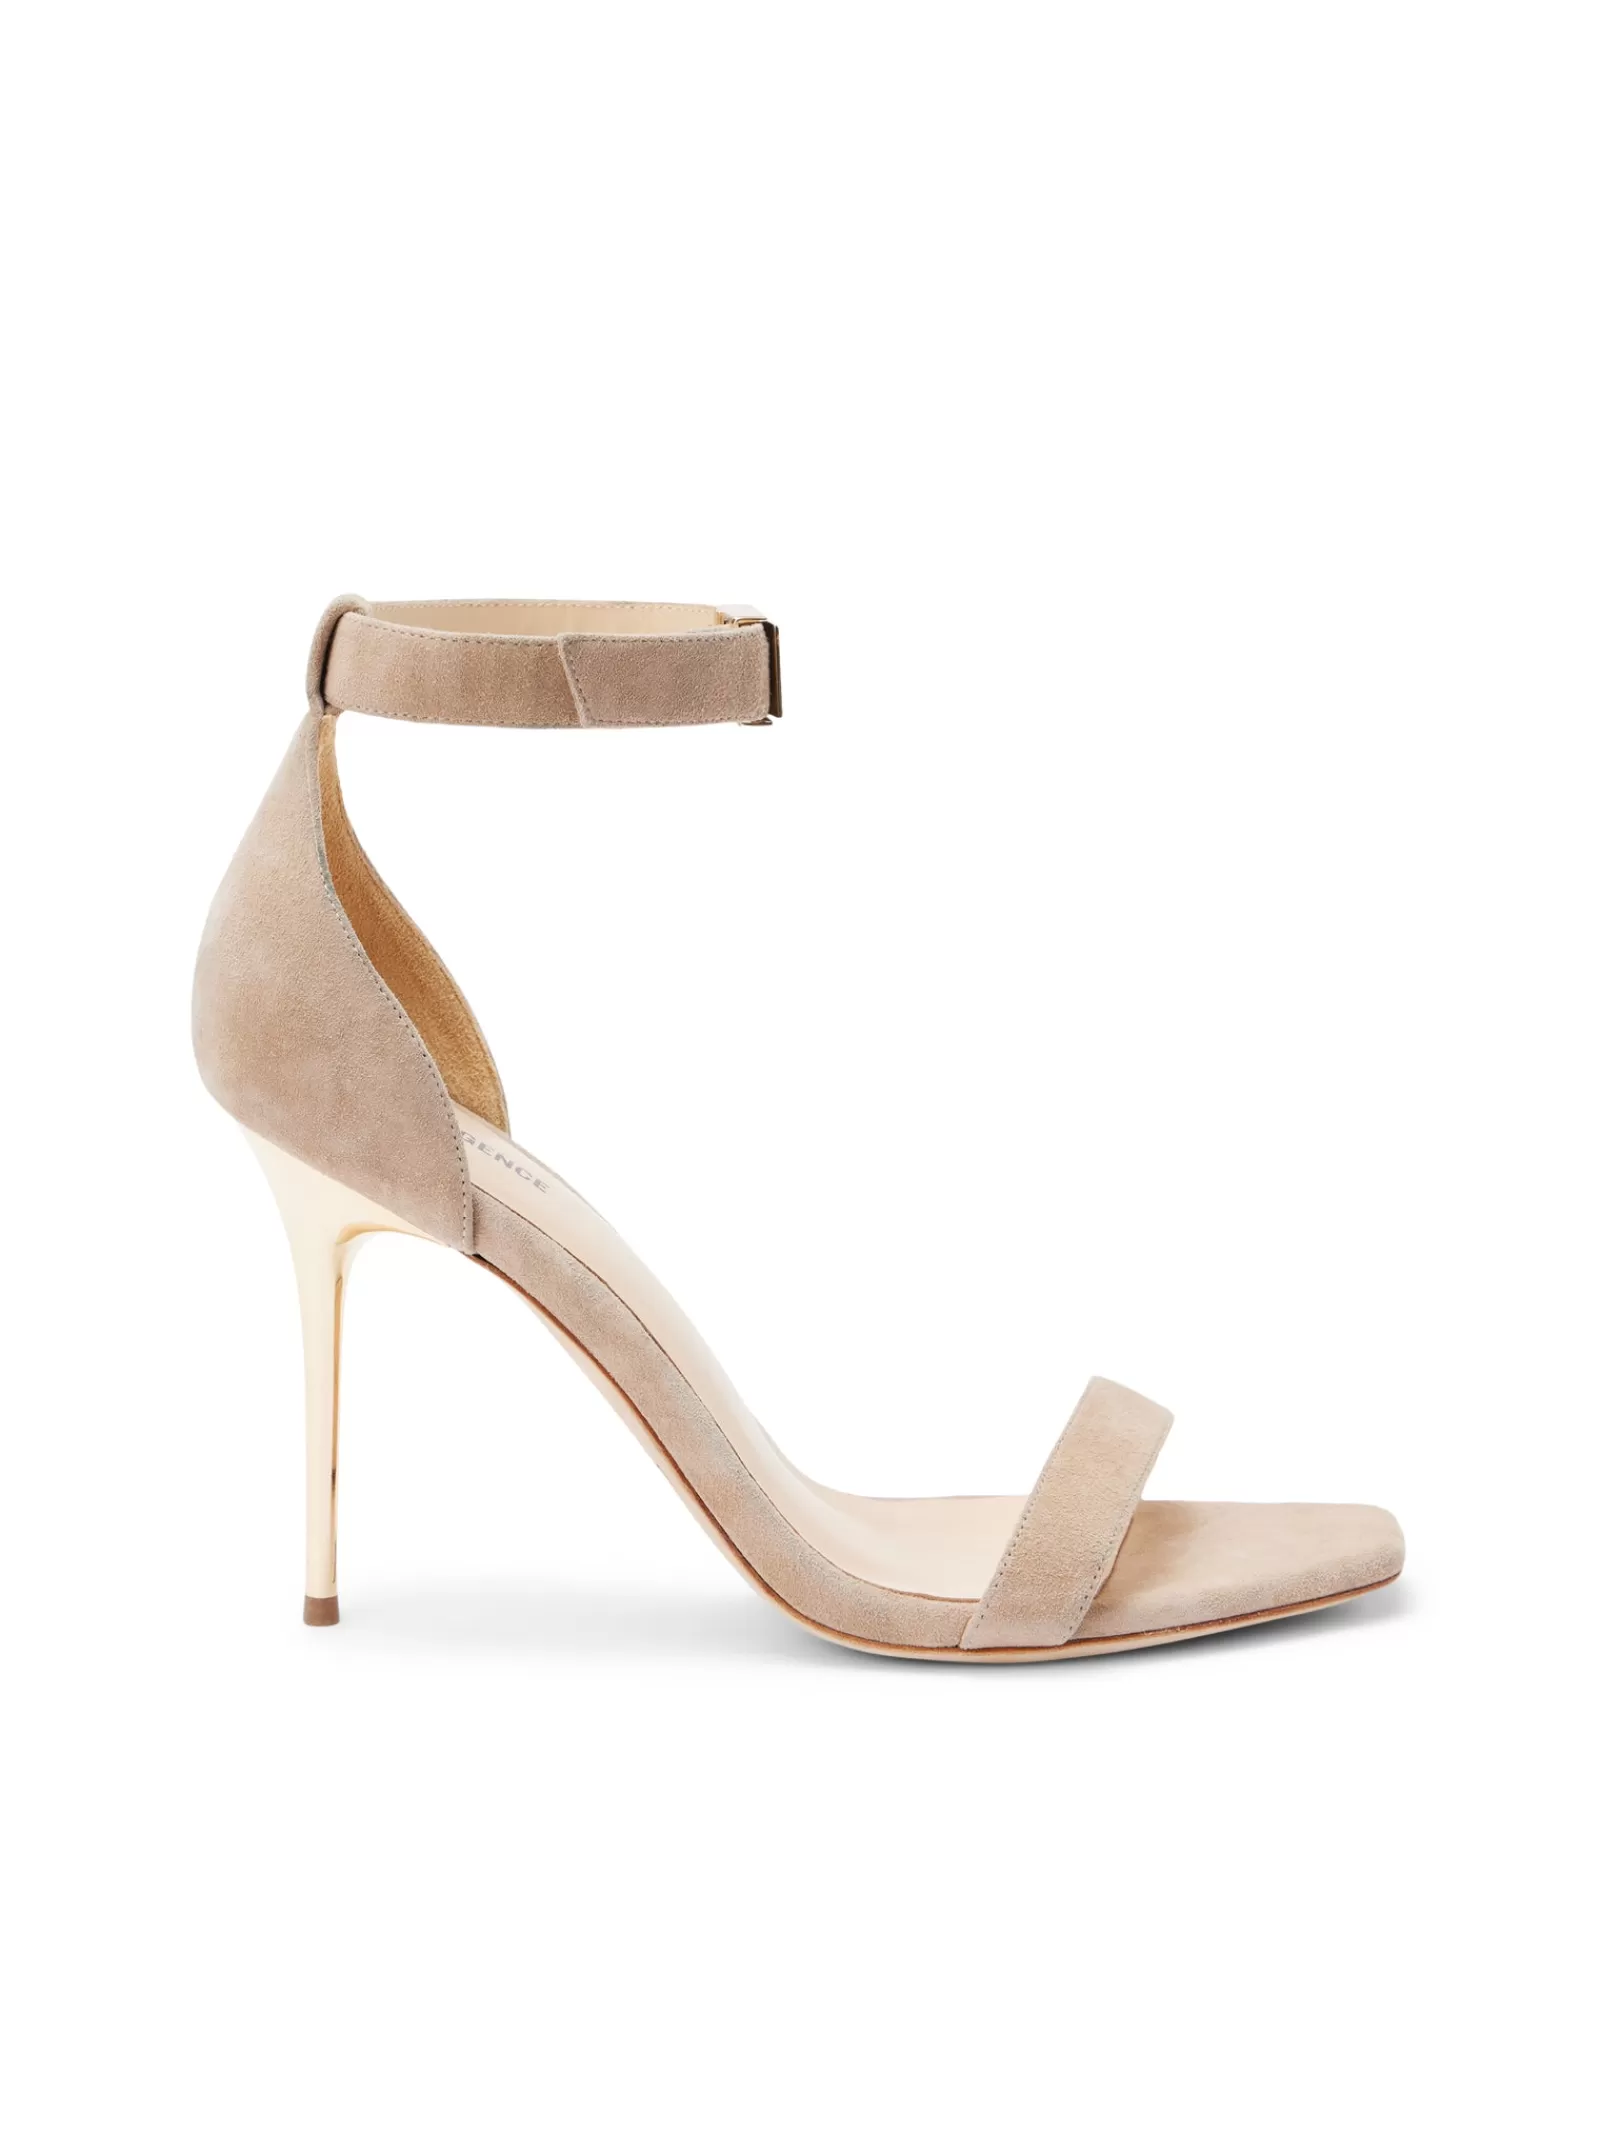 L'AGENCE Thea Sandal< Resort Collection | Sandals & Wedges